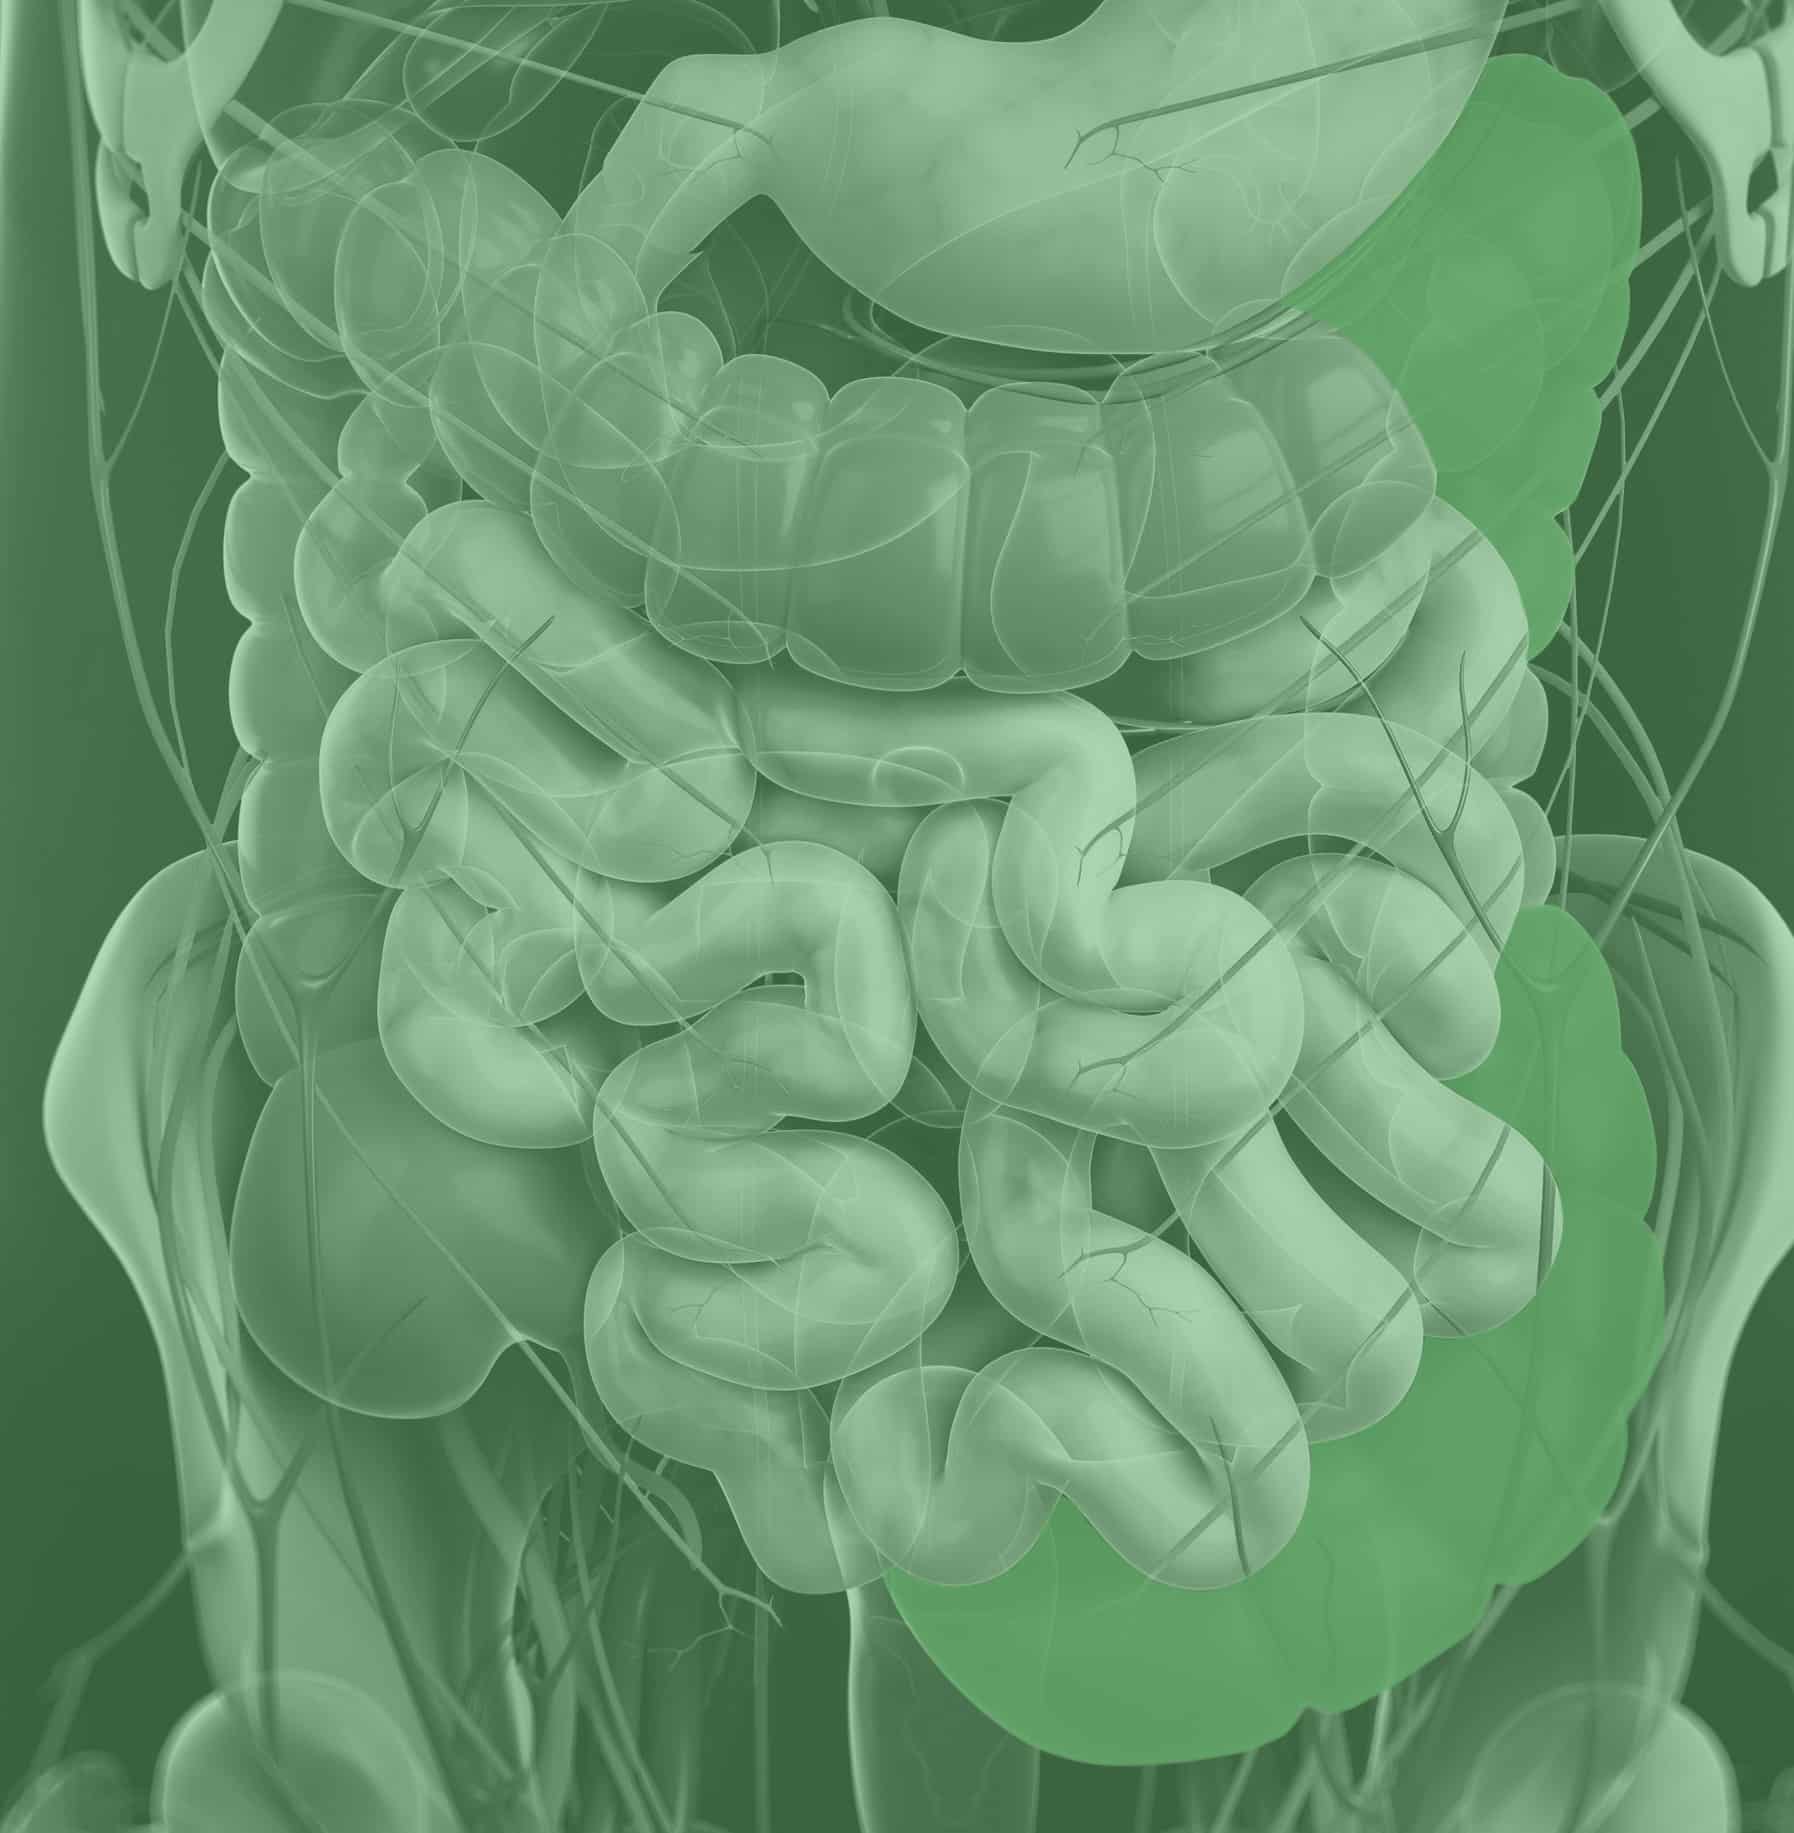 7 Biomarkers for Differentiating Between IBD and IBS